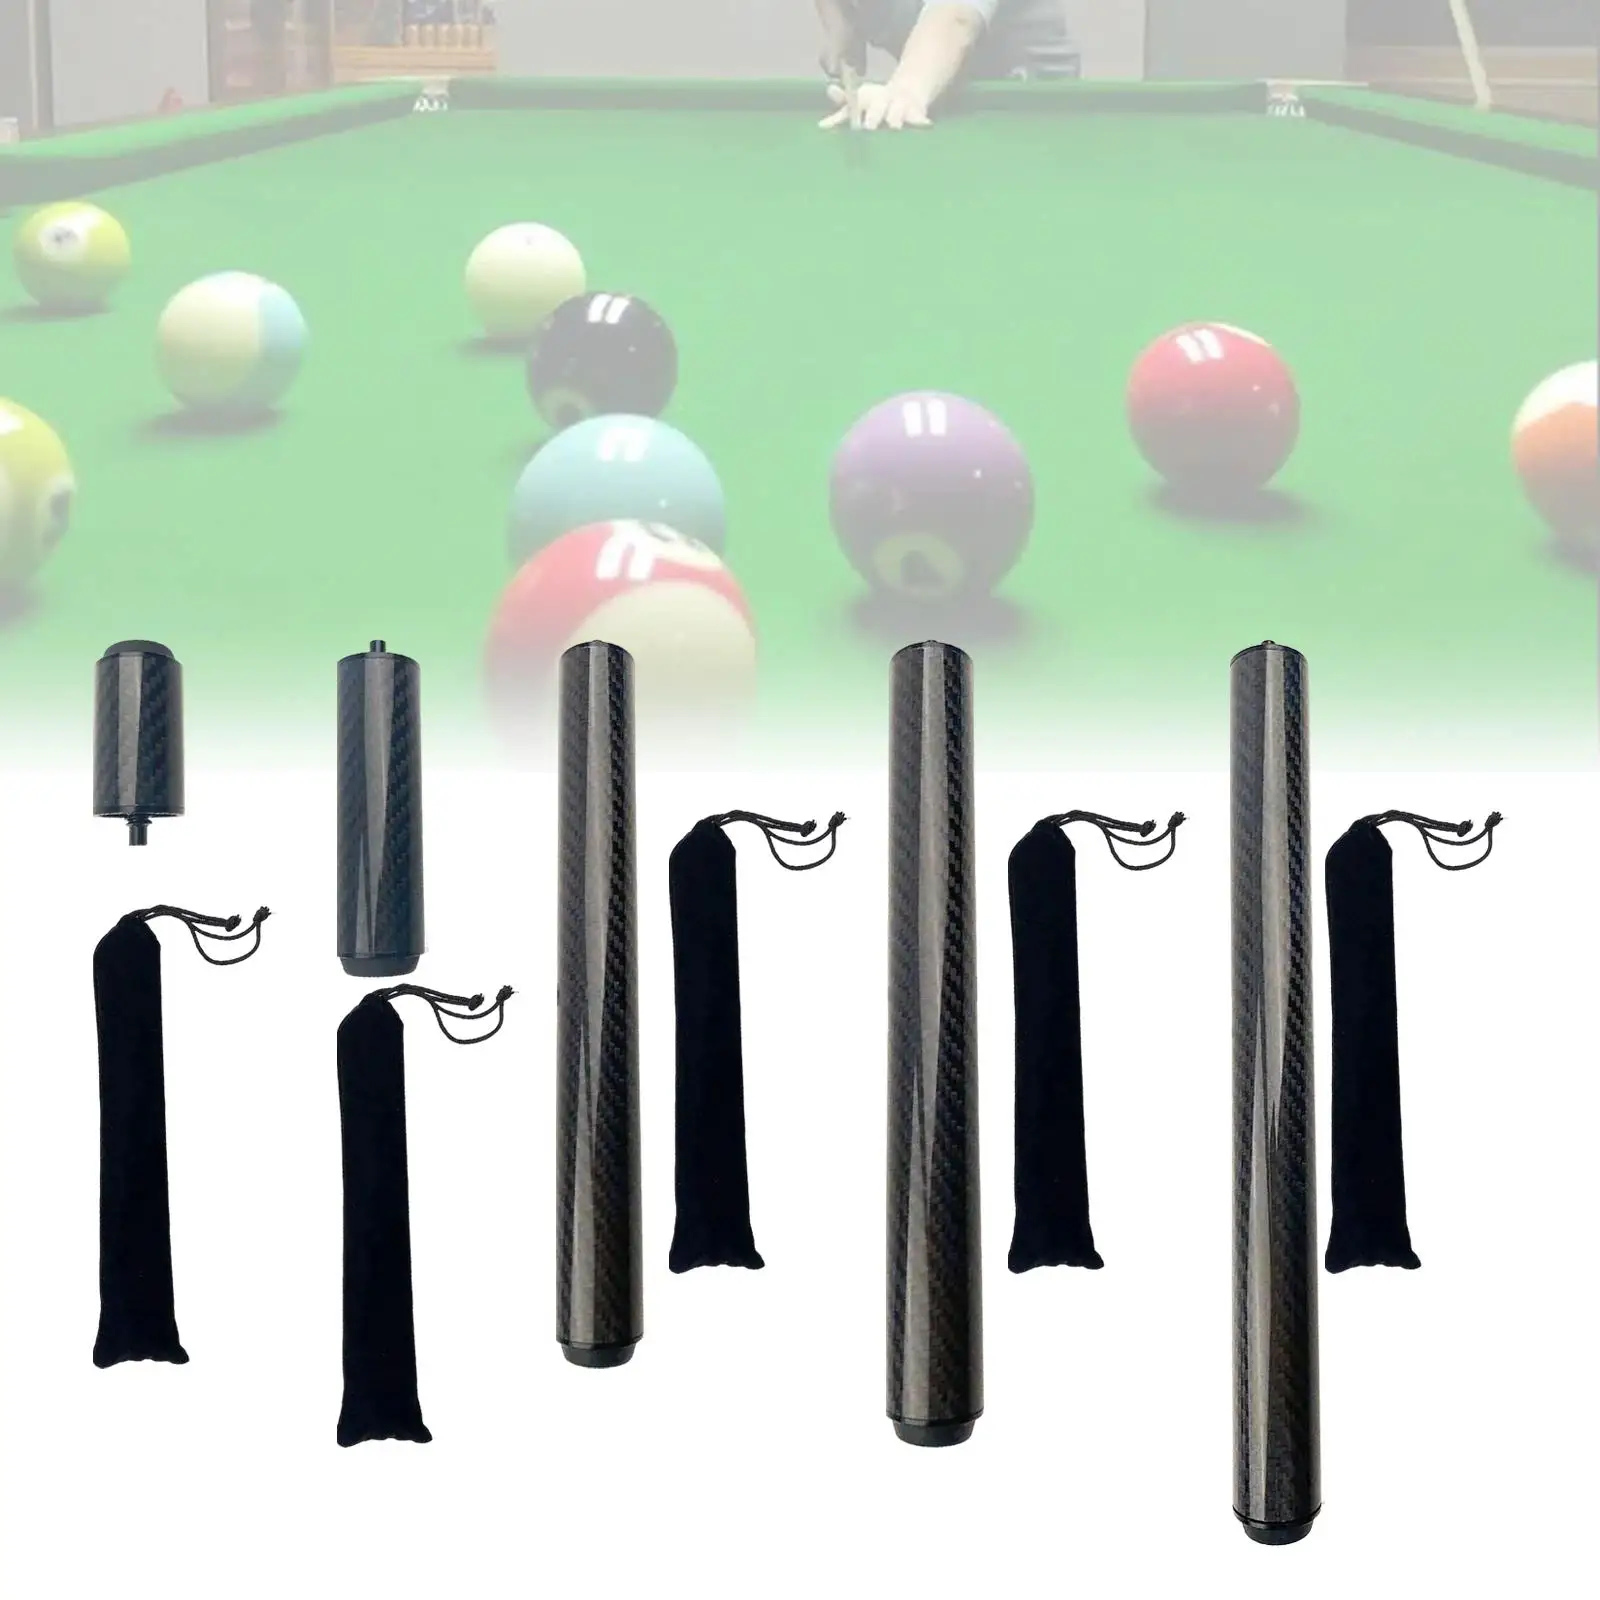 Billiards Pool Cue Extension Snooker Cue Extend Cue End Lengthener Weights